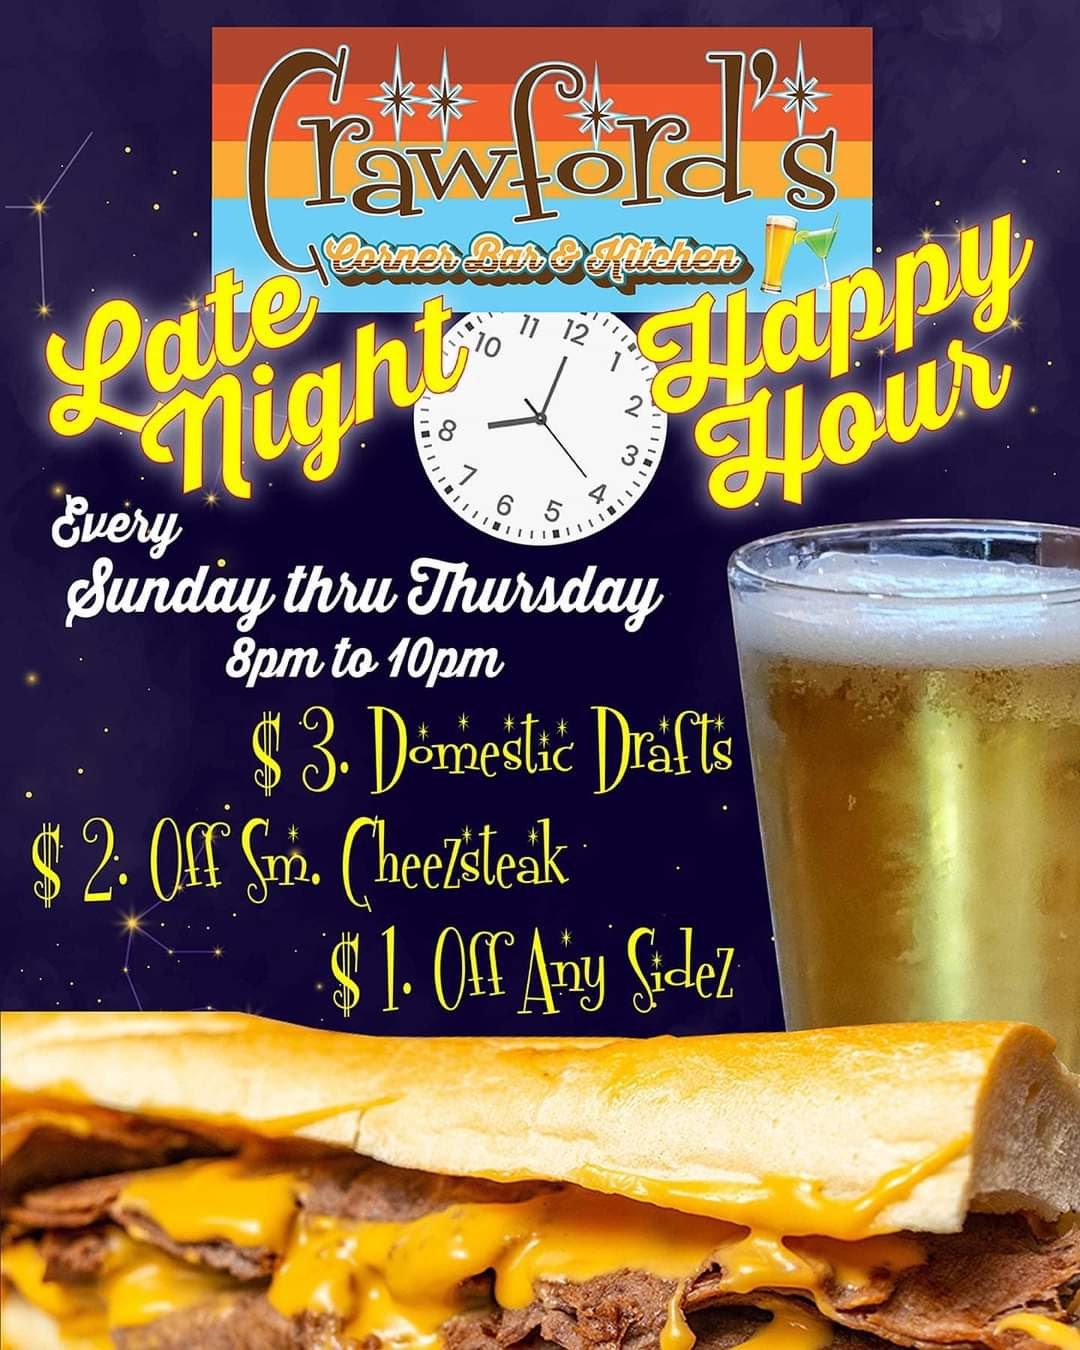 Crawford's Late NIght Happy Hour